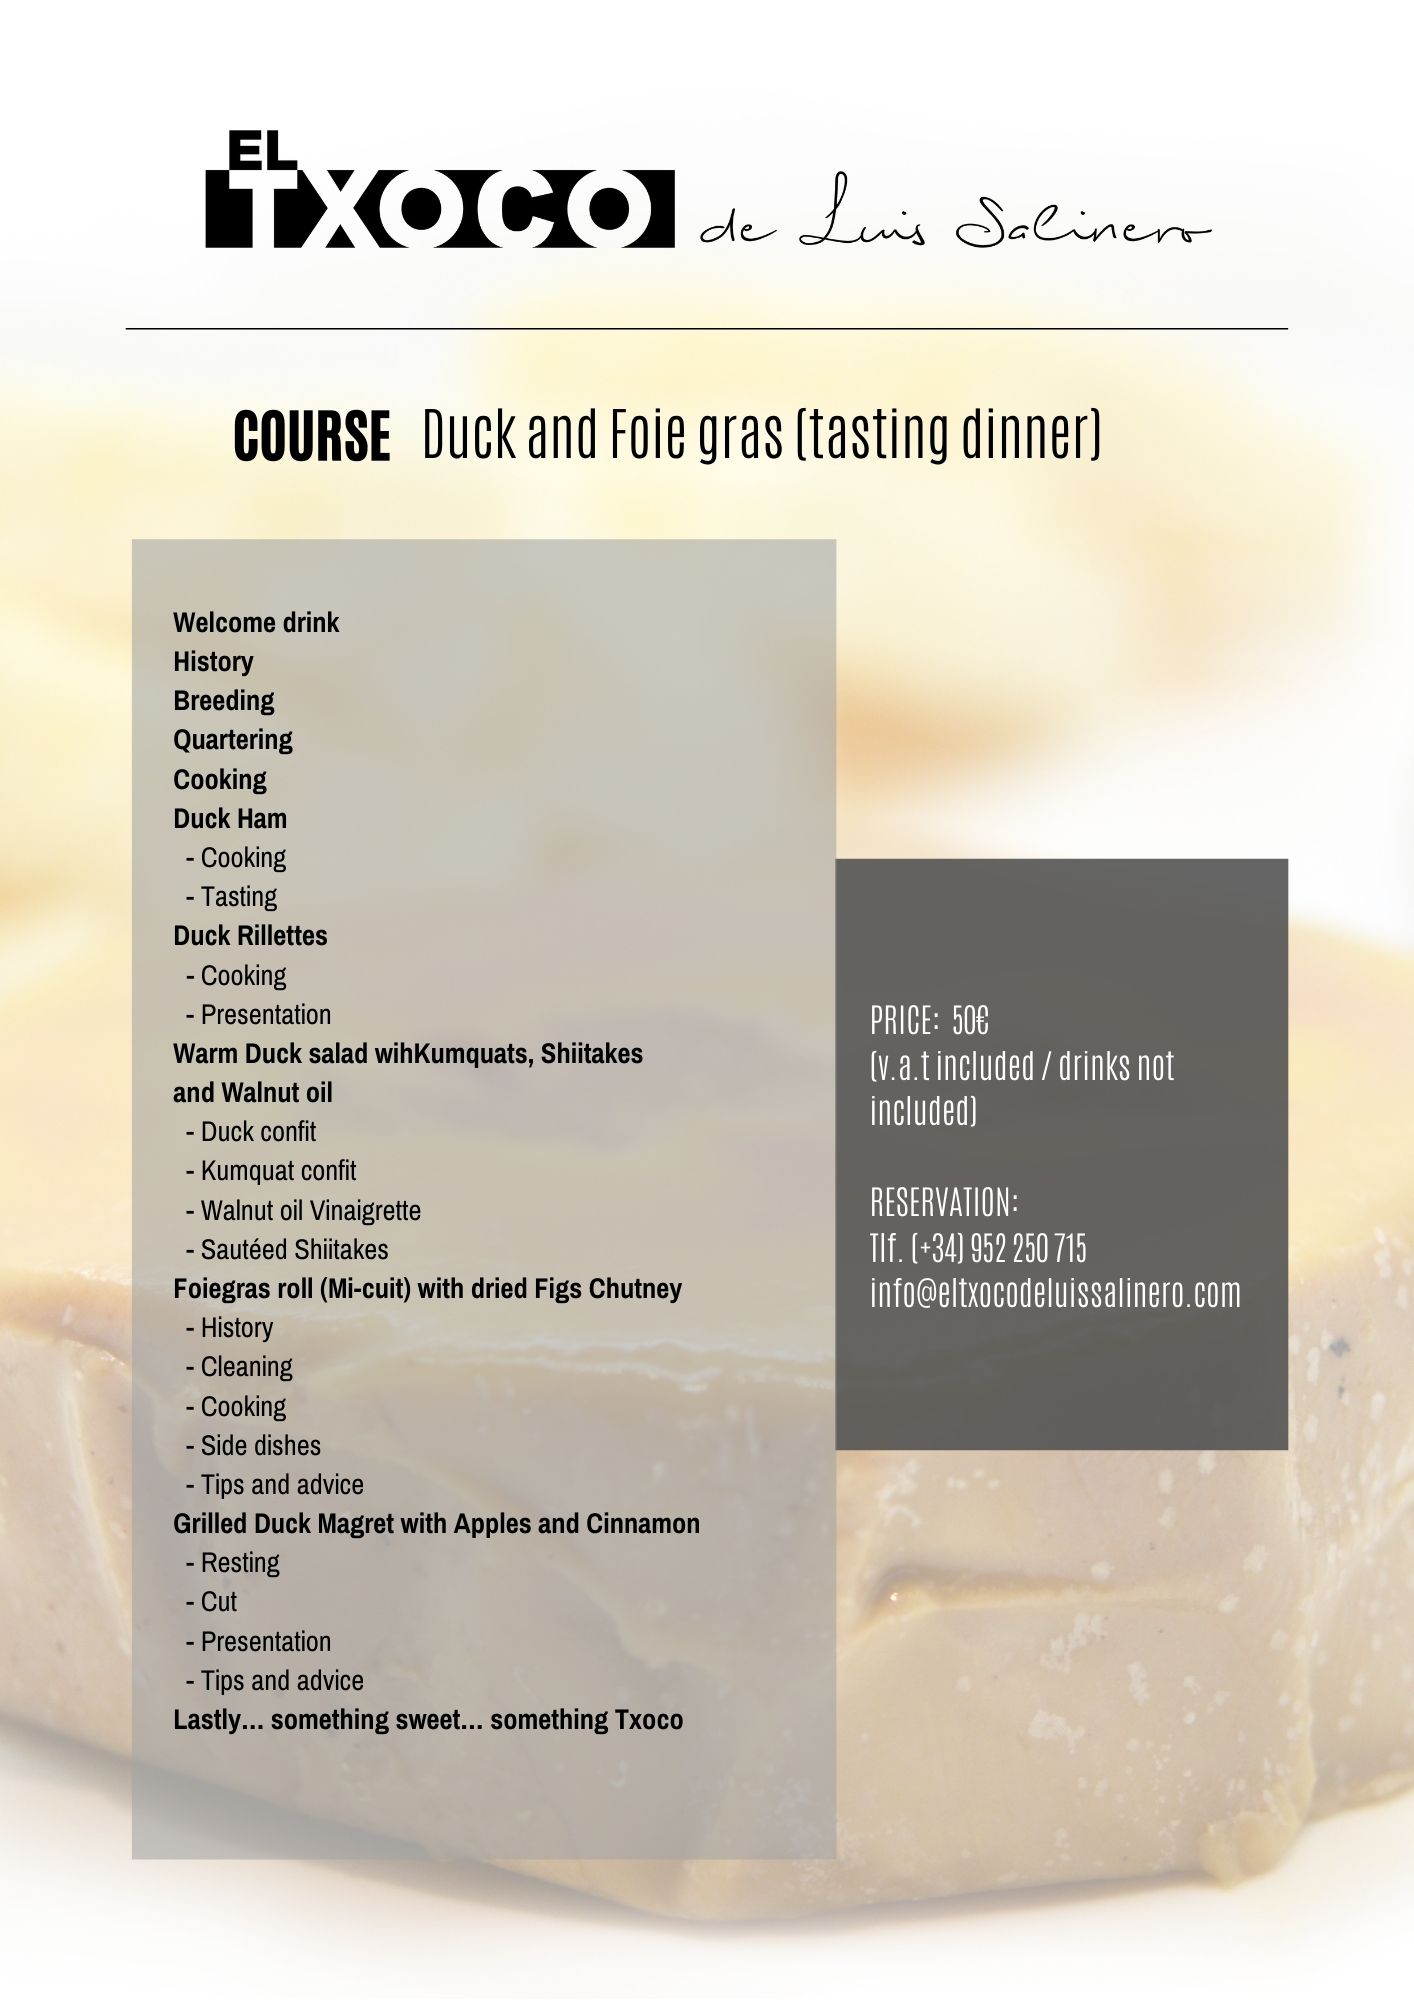 Course Duck and Foie gras (tasting dinner)